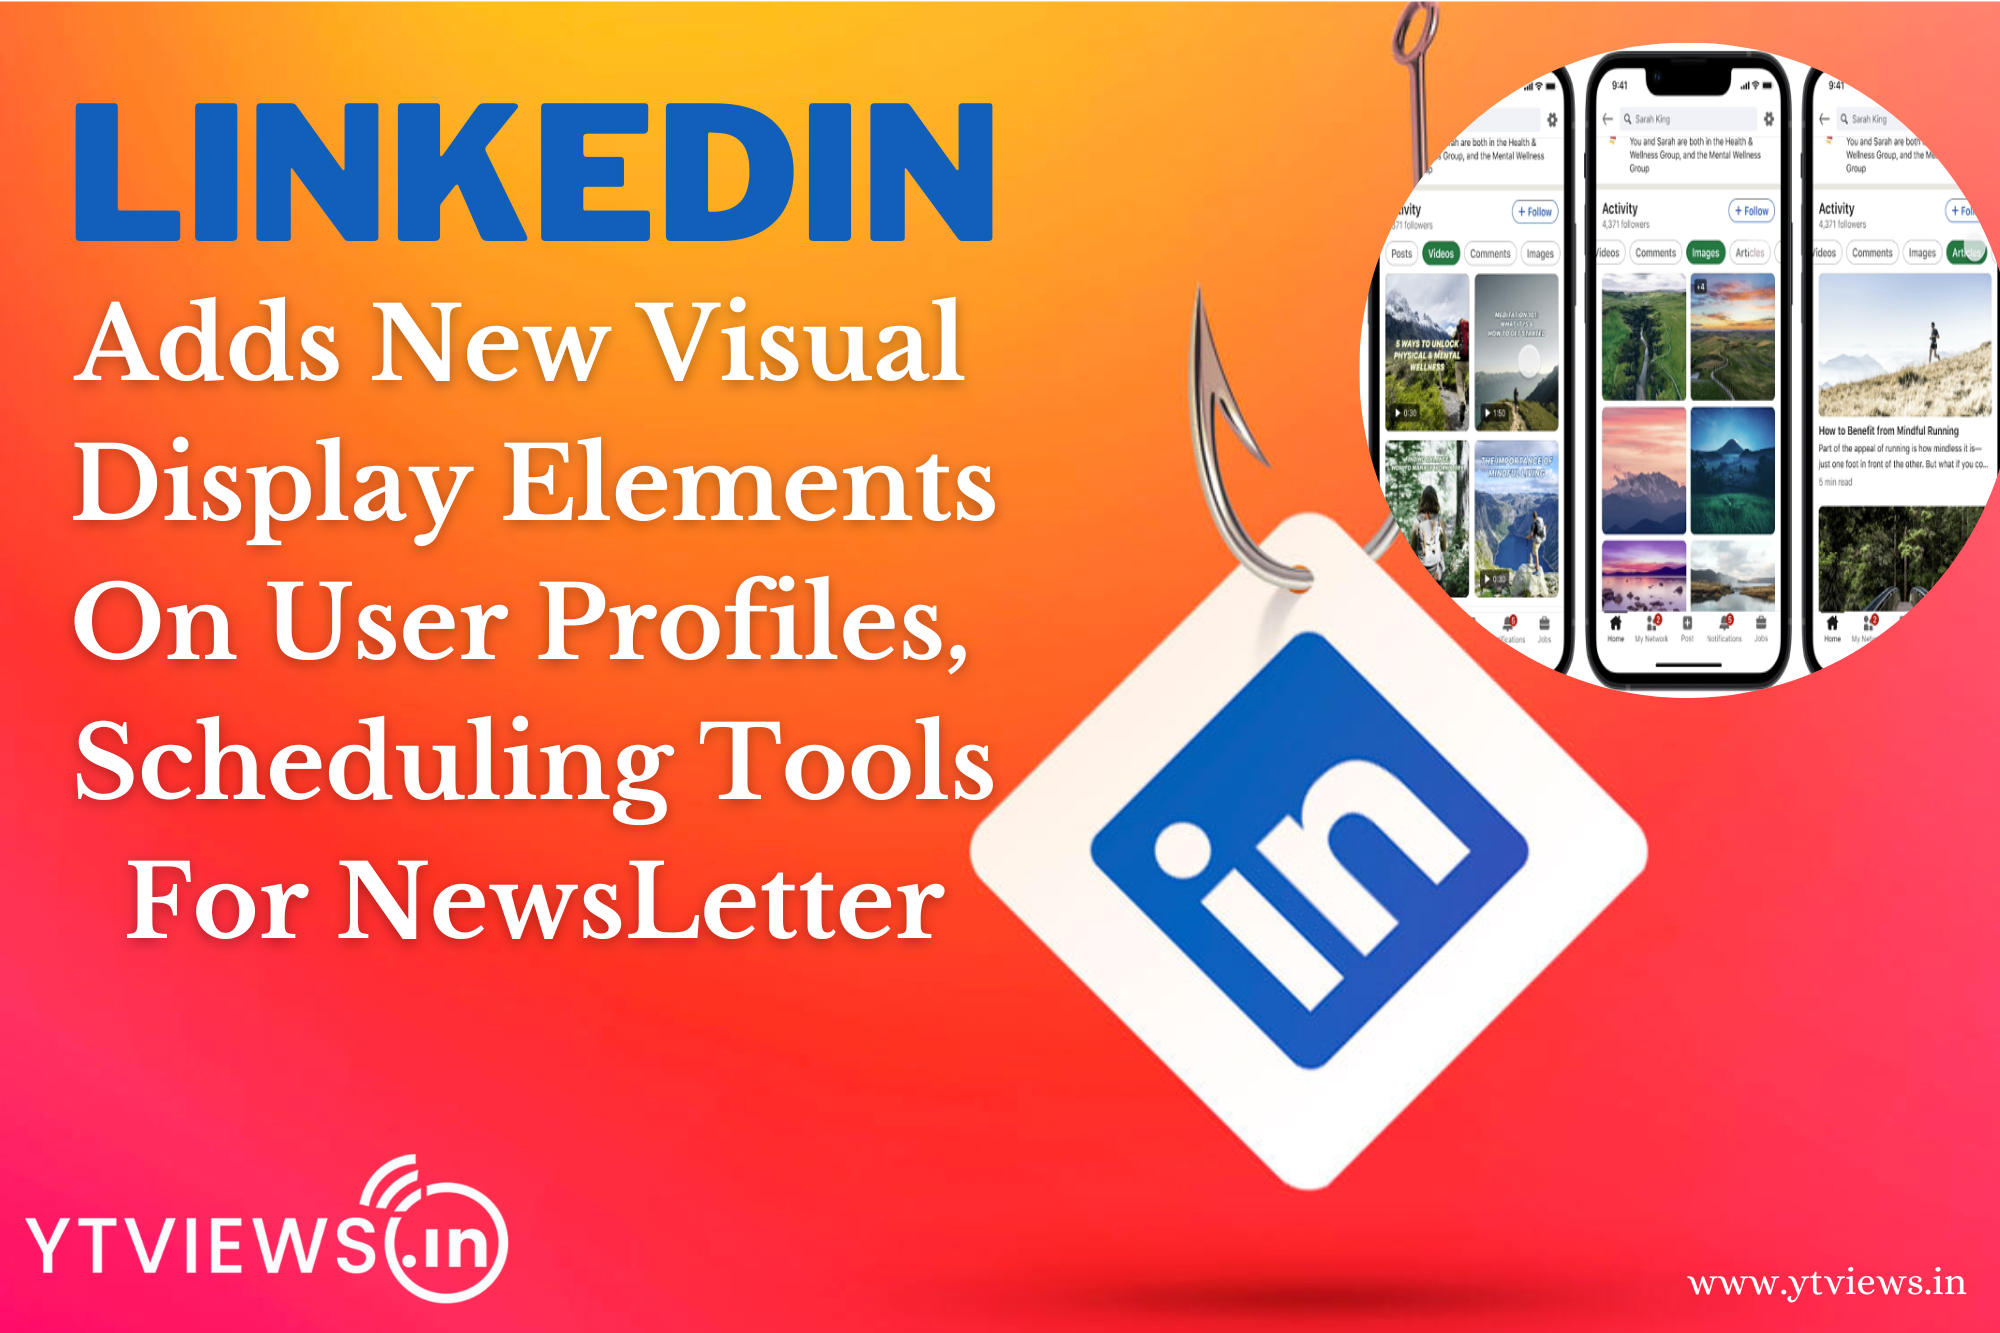 LinkedIn adds New Visual Display Elements on User Profiles, Scheduling Tools for Newsletters